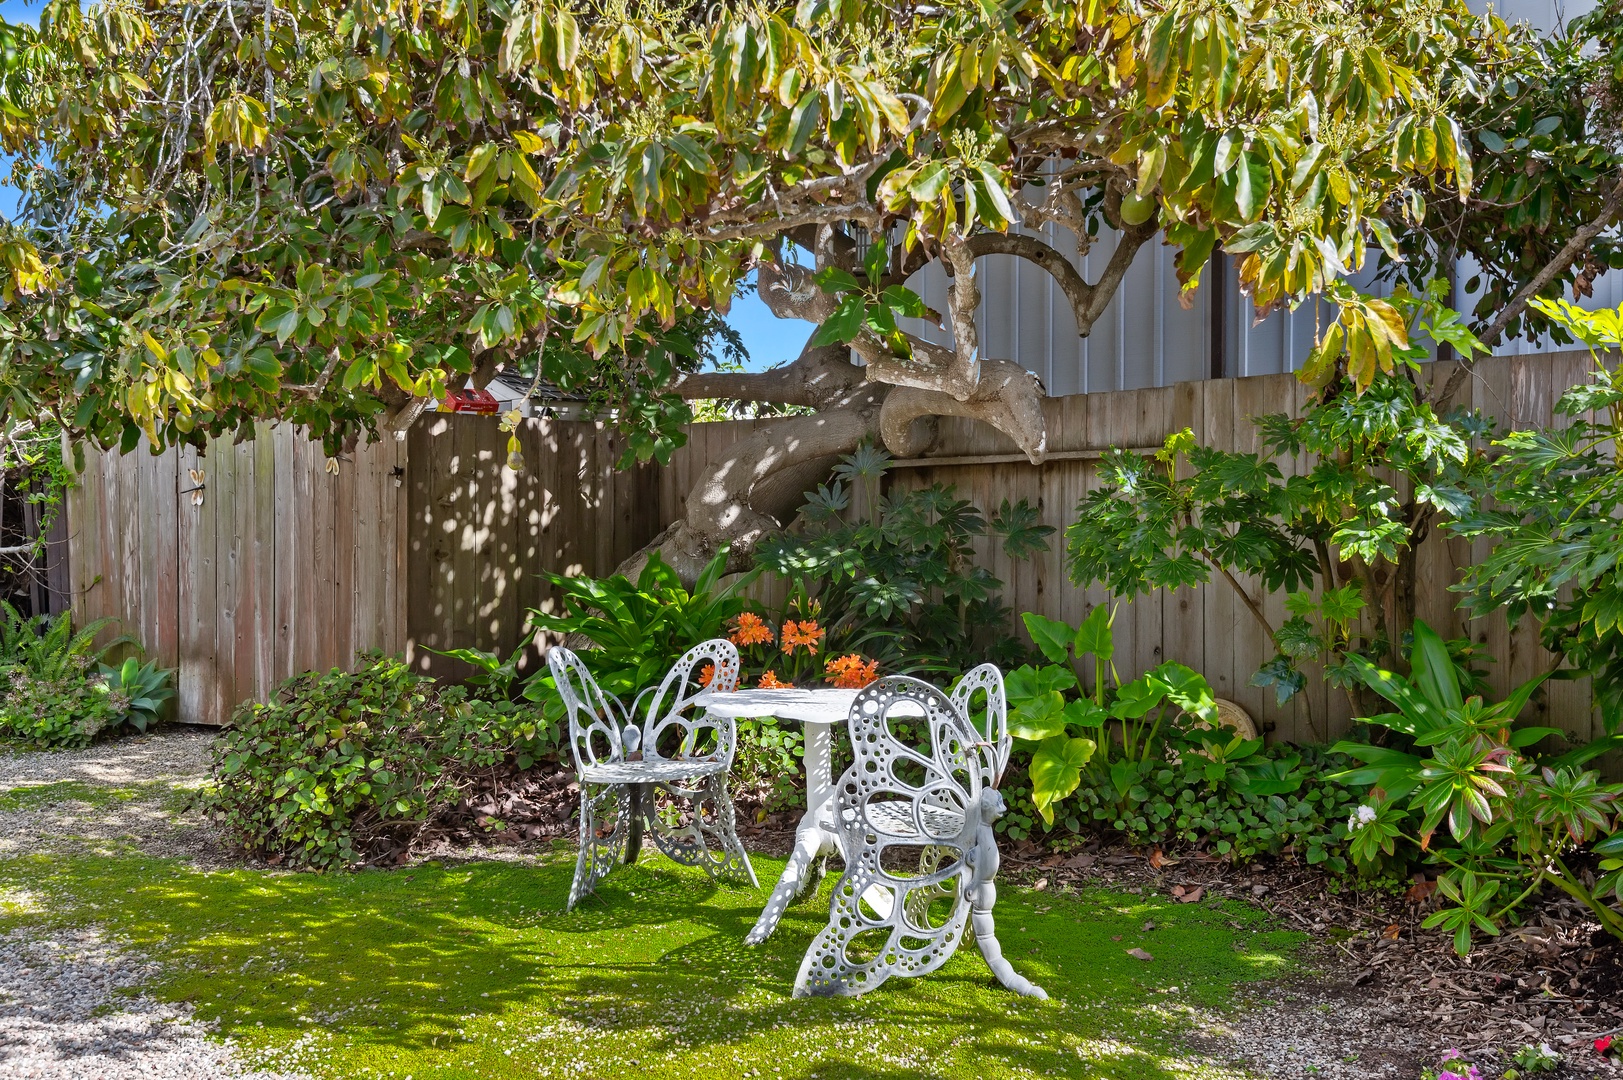 Take tea under the shade of one of this home’s fruit trees at this outdoor Dining Table with seating for 2